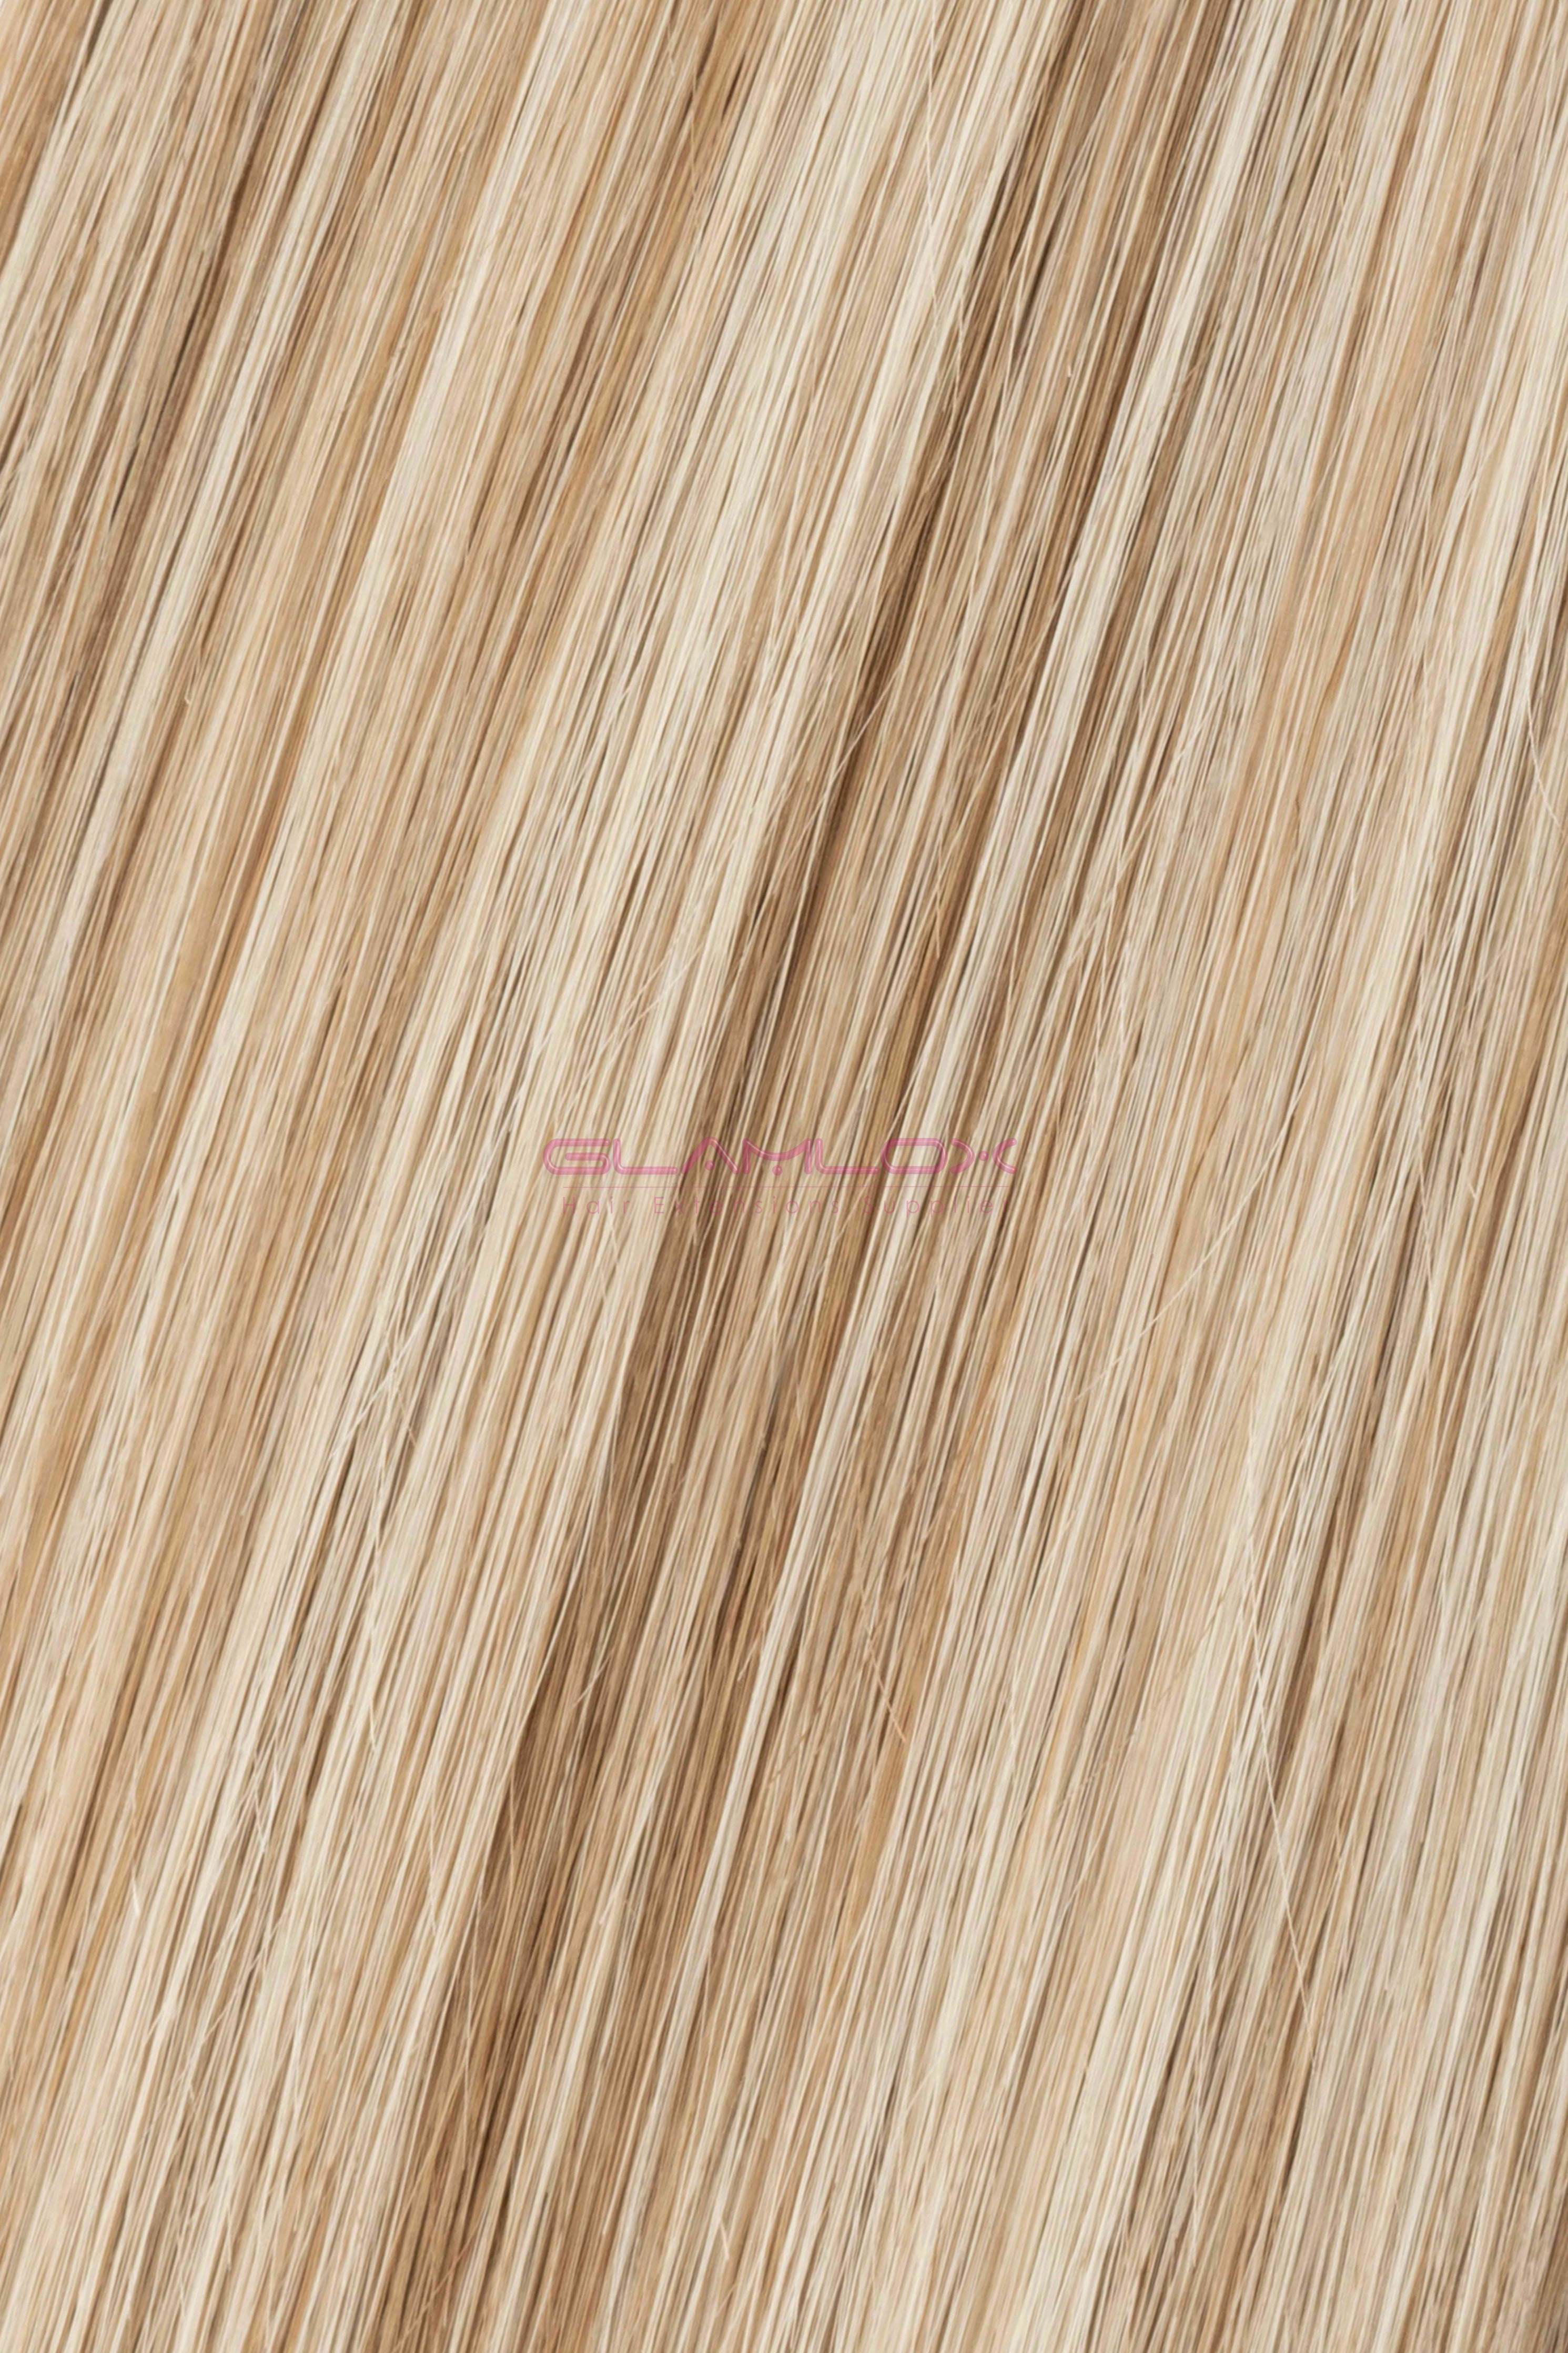 20" Pre-Bonded - Russian Mongolian Double Drawn Remy Human Hair - 20 Strands